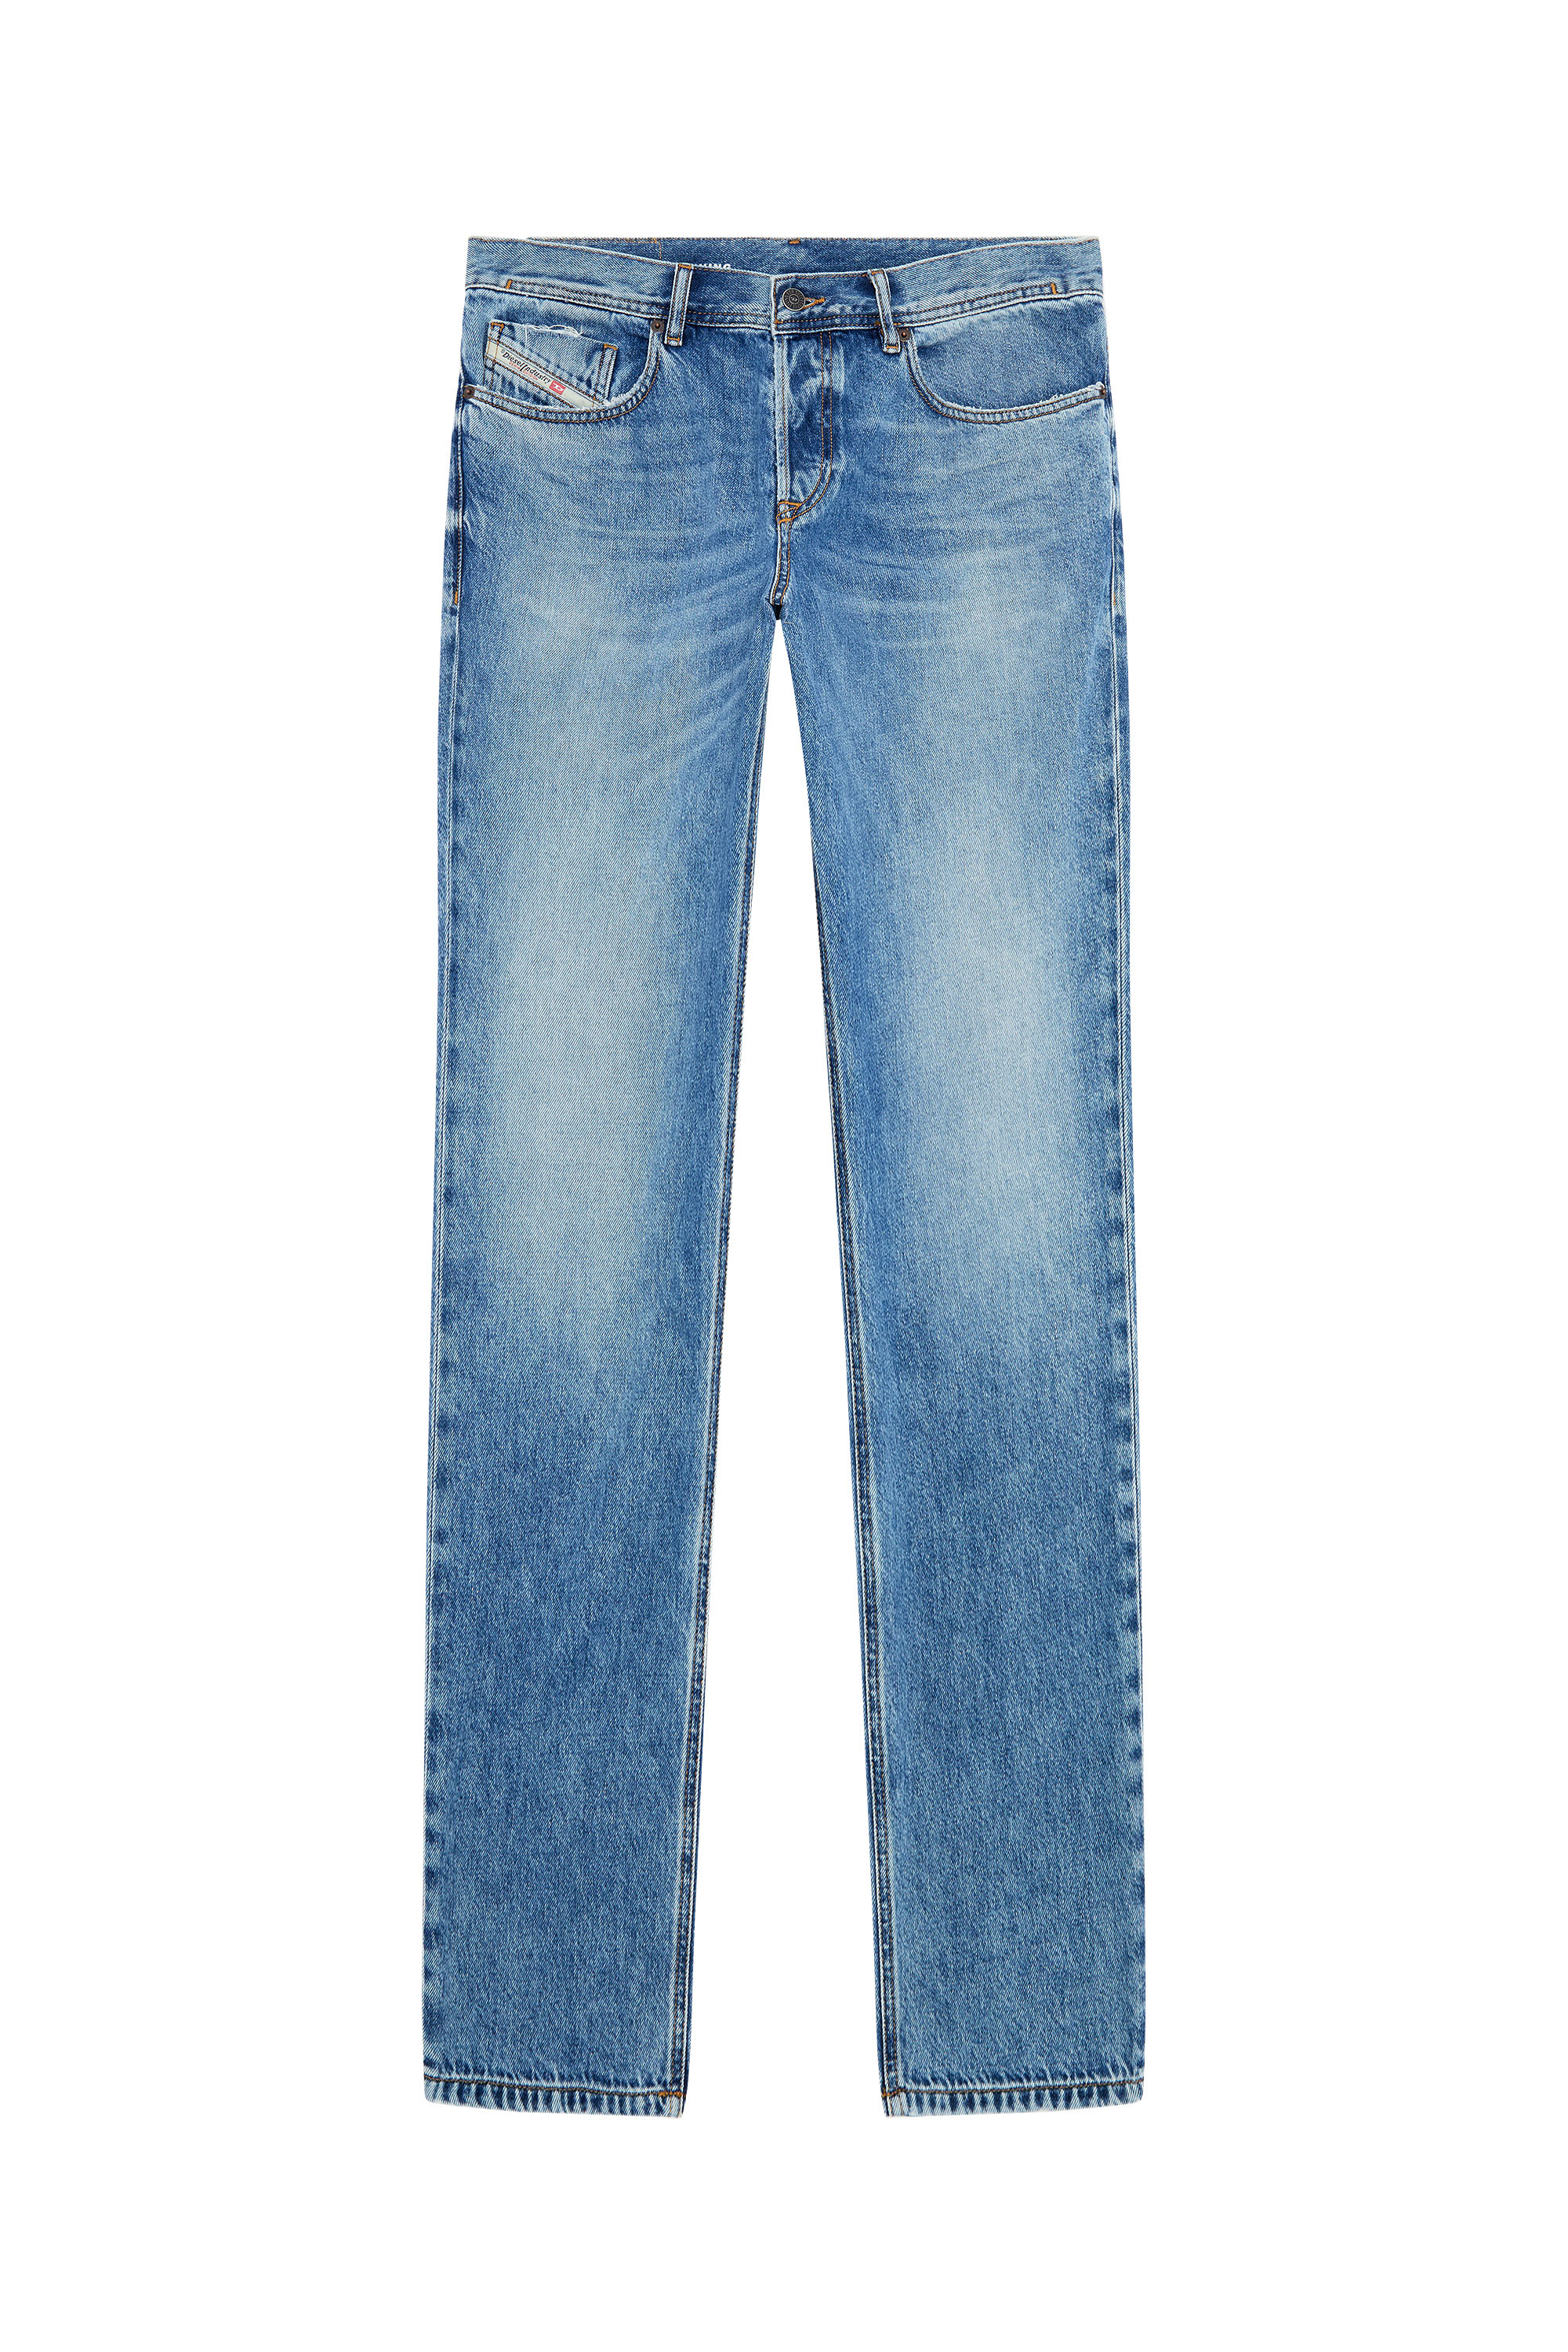 Diesel - Tapered Jeans 2023 D-Finitive 09H95, Hombre Tapered Jeans - 2023 D-Finitive in Azul marino - Image 5